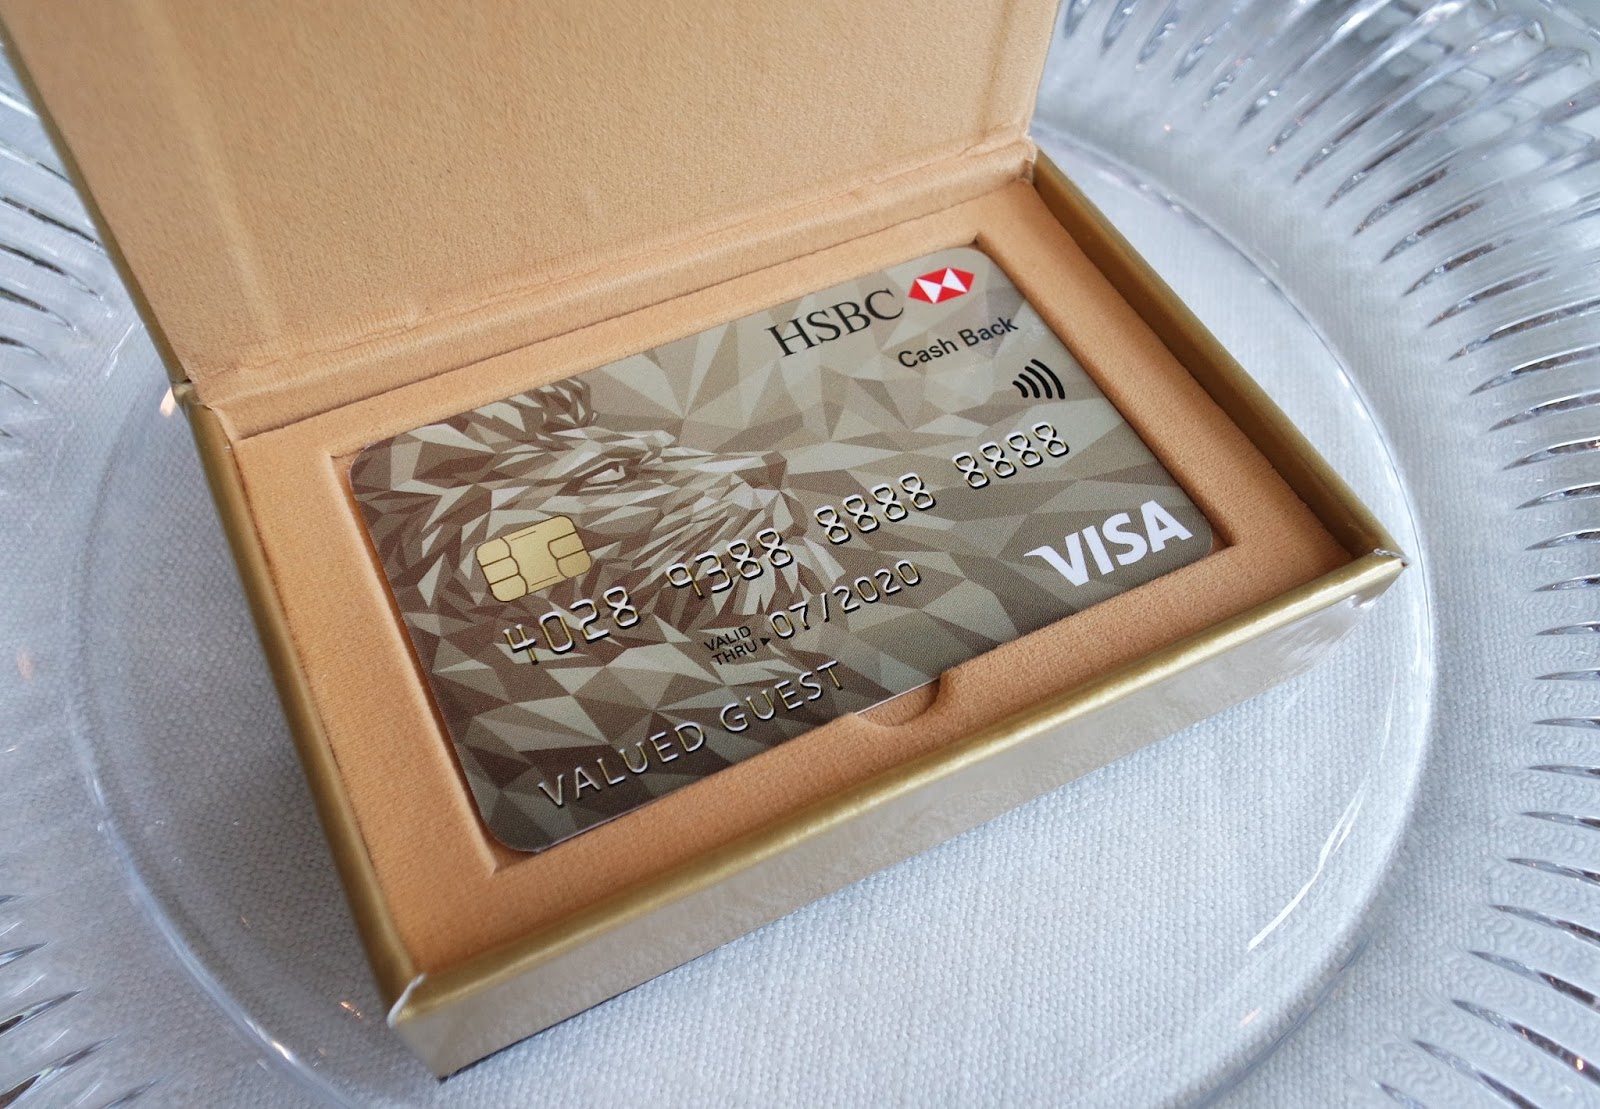 How To Claim Money Back From Hsbc Credit Card